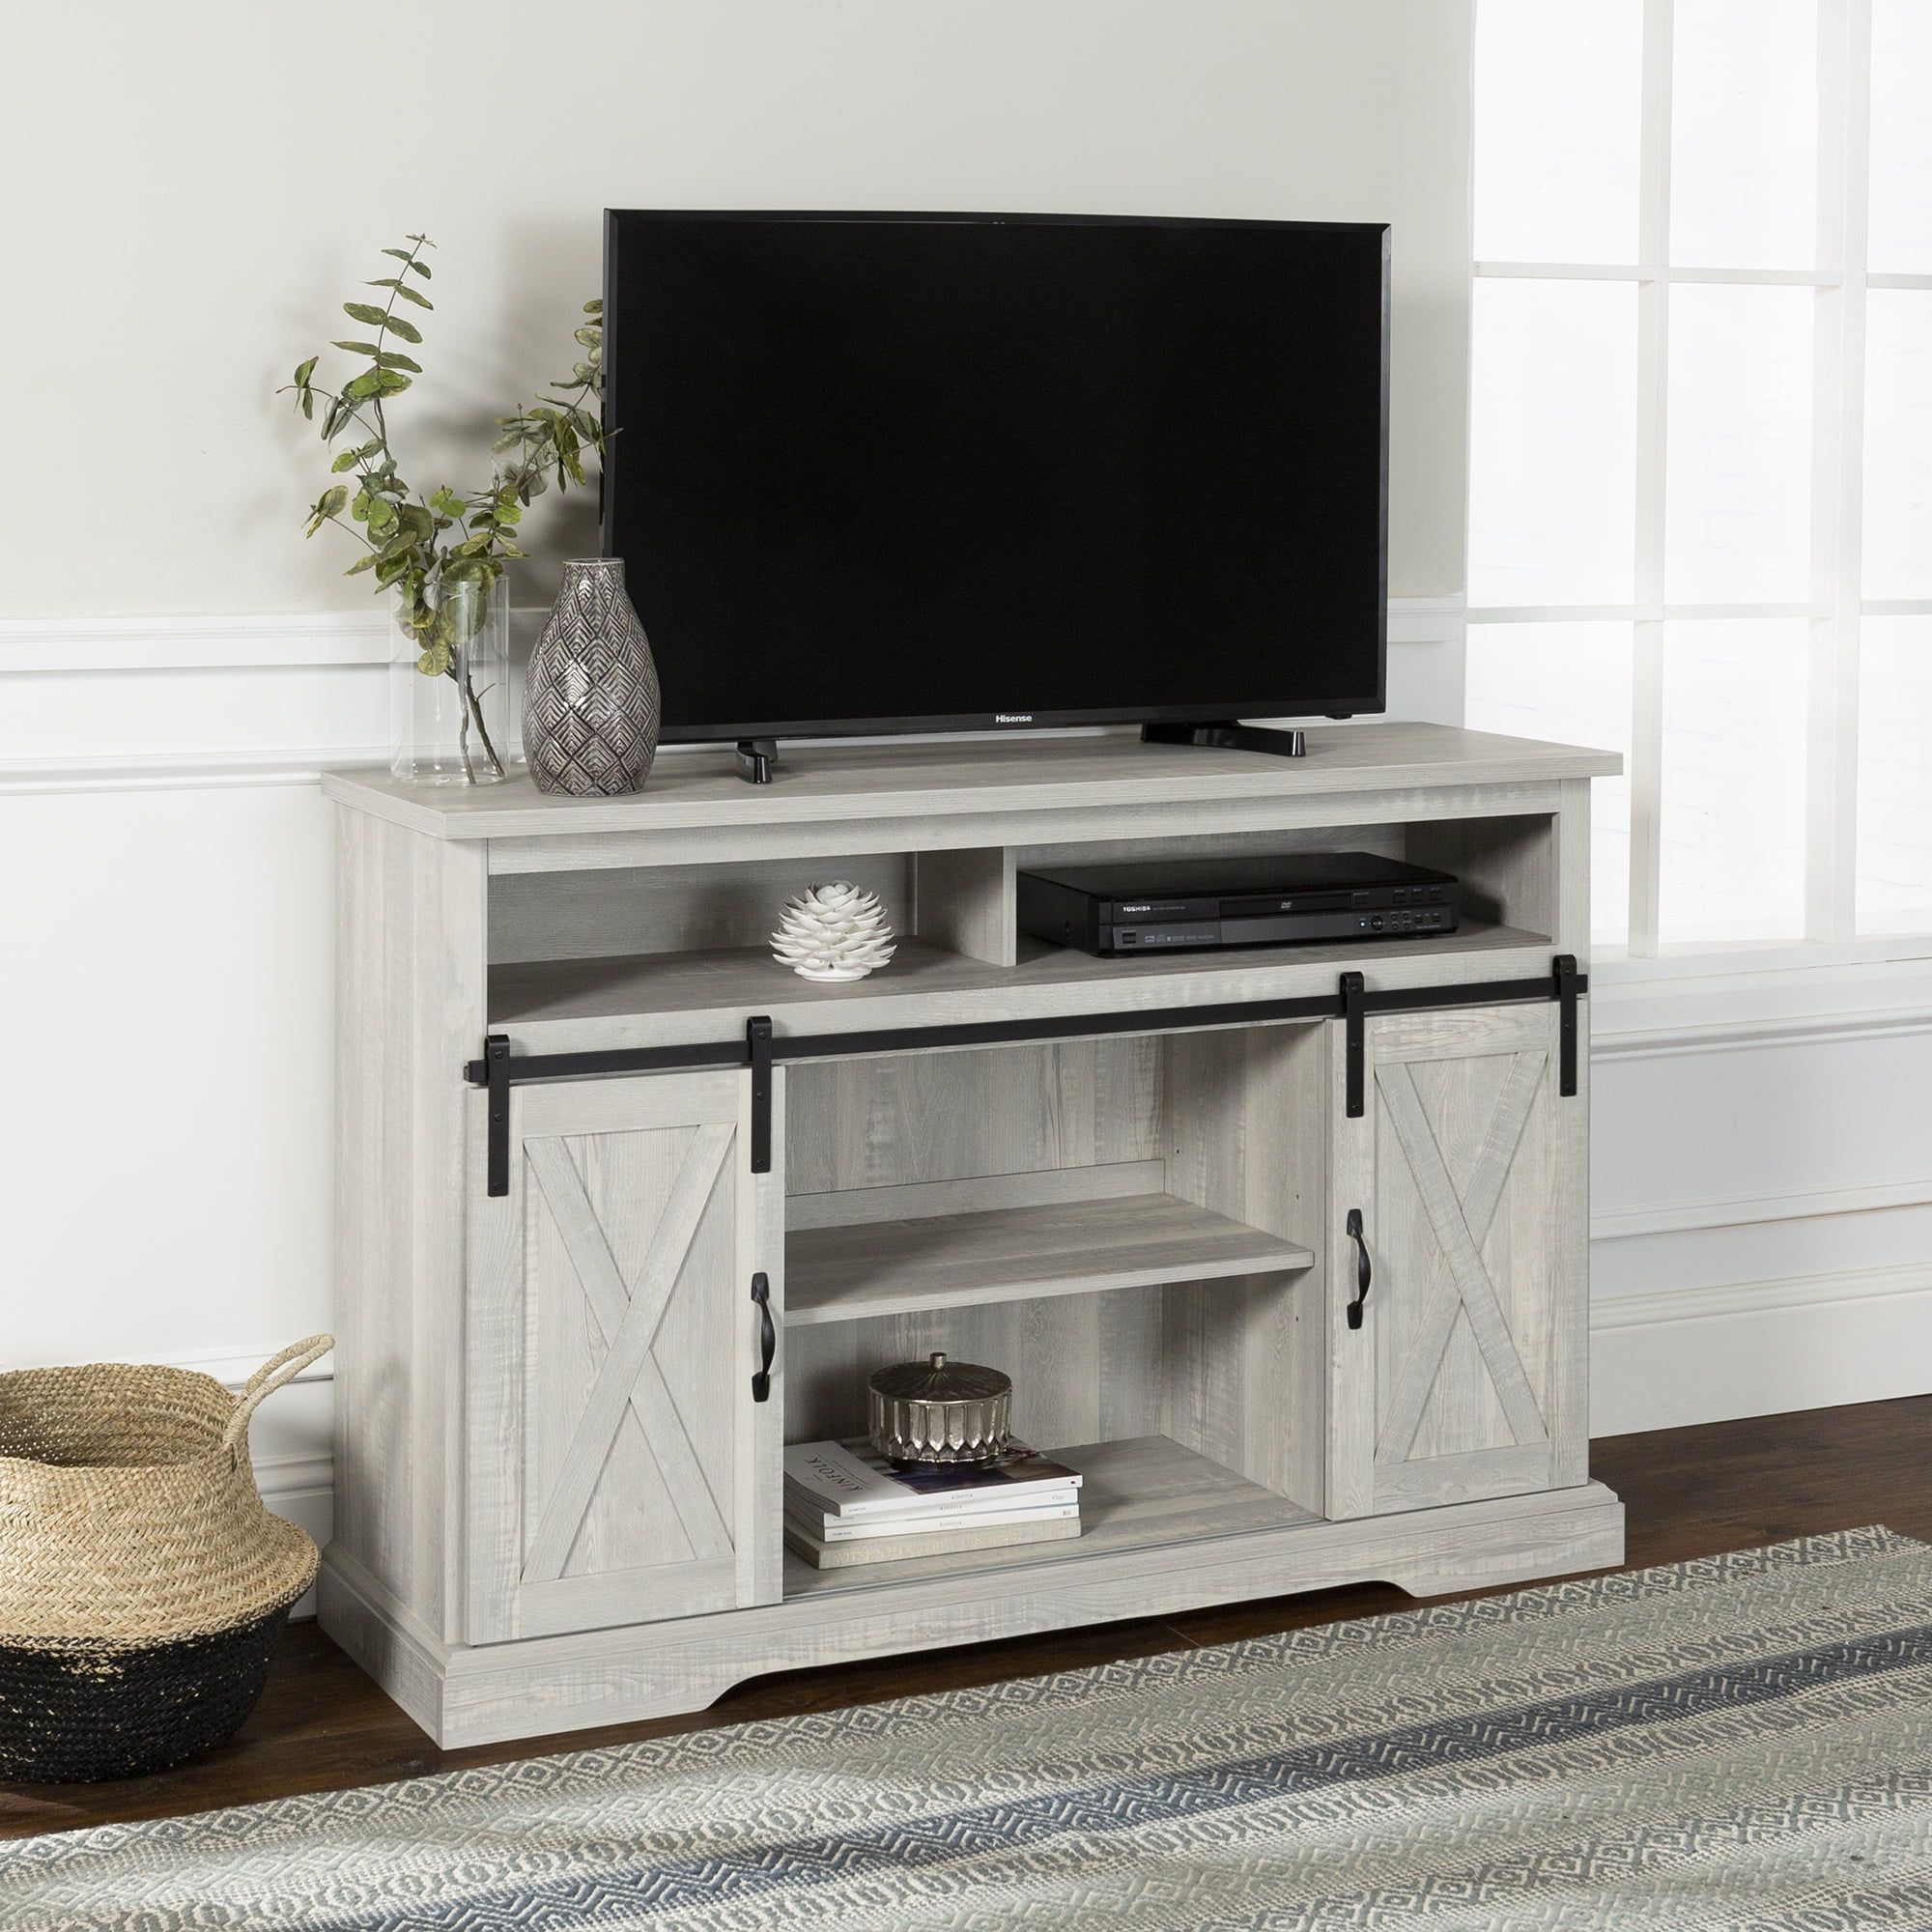 Manor Park Farmhouse Barn Door Tv Stand For Tvs Up To 58", Stone Grey Throughout Farmhouse Tv Stands (View 11 of 20)